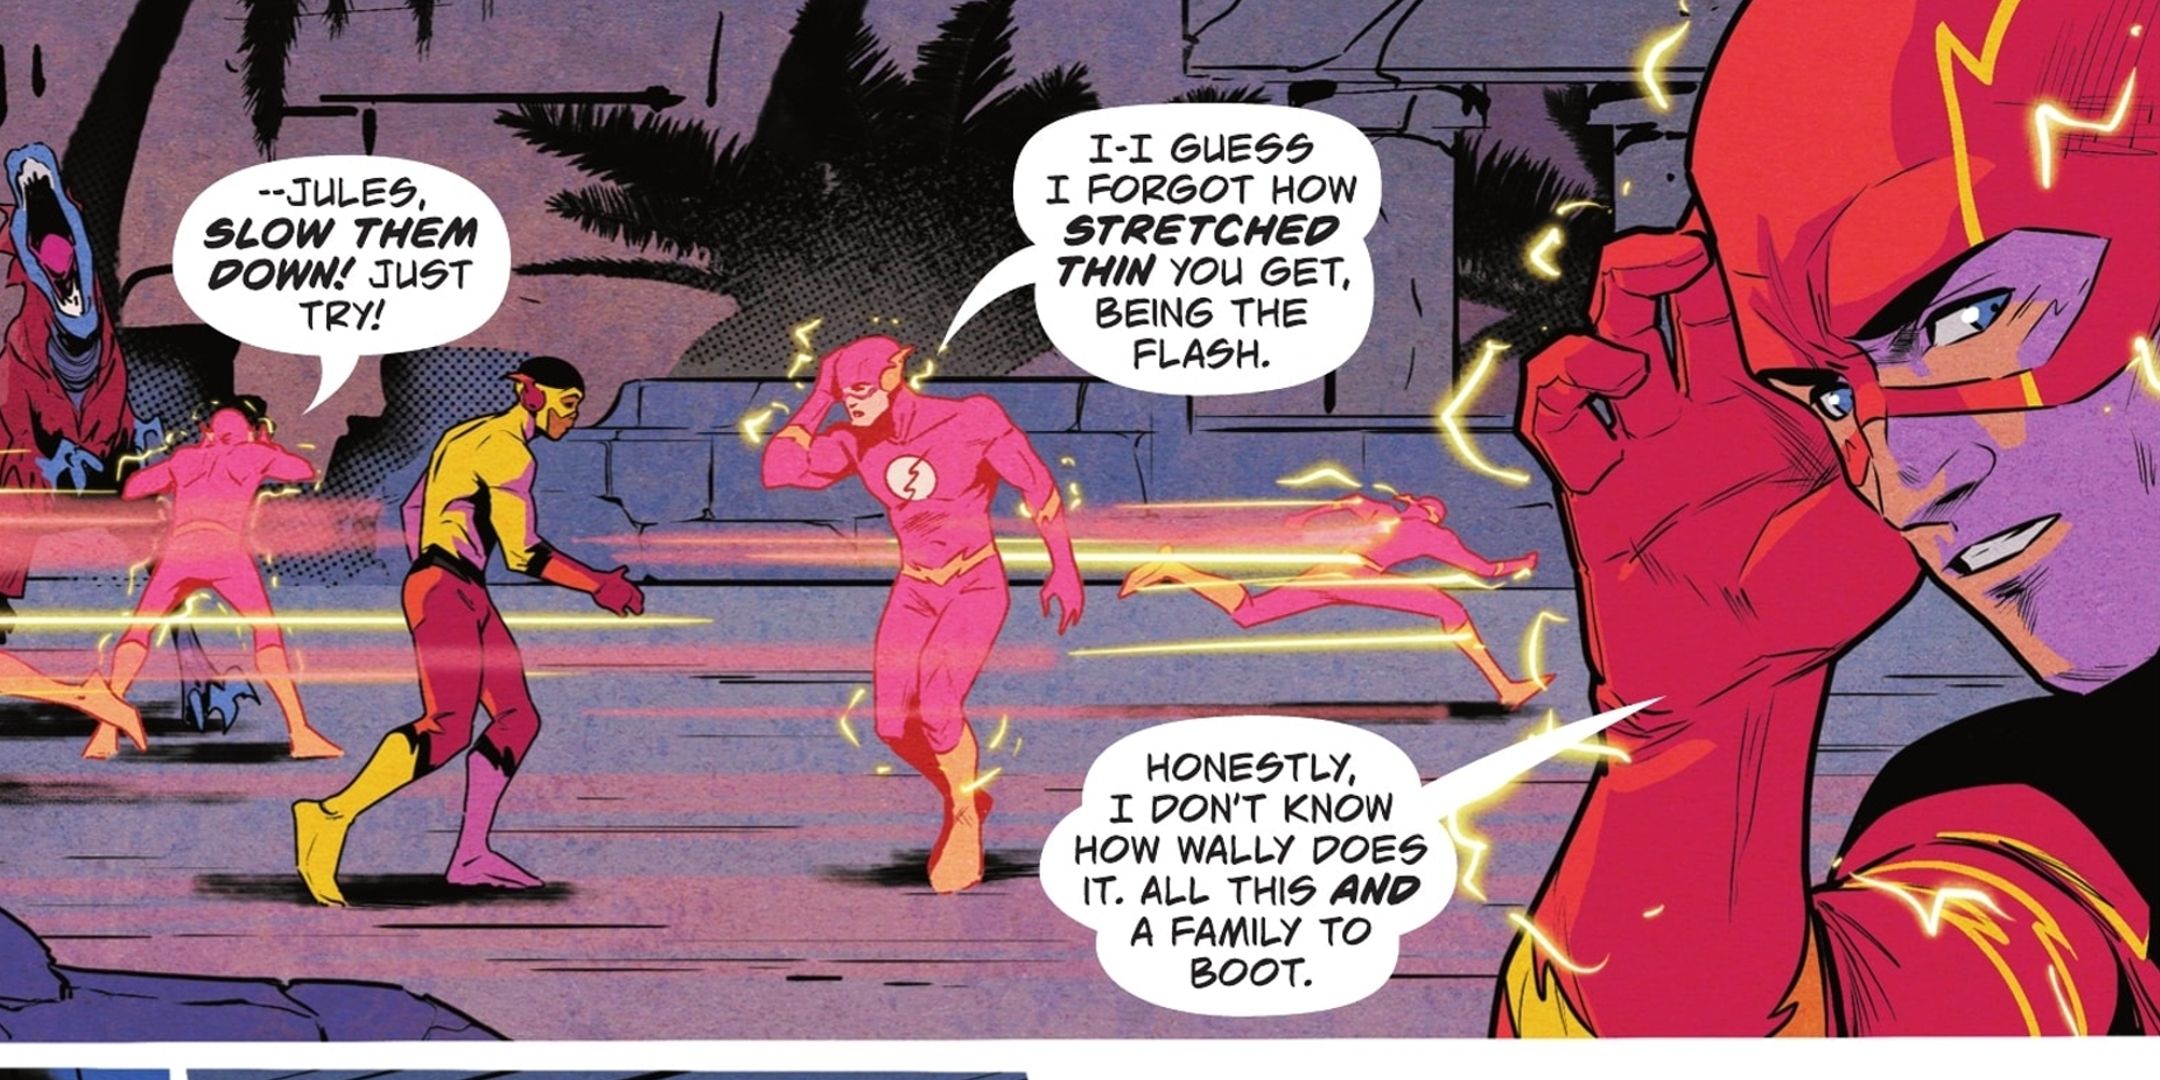 Barry Allen vs Wally West: DC Settles the Ultimate Flash, Based on More Than Speed